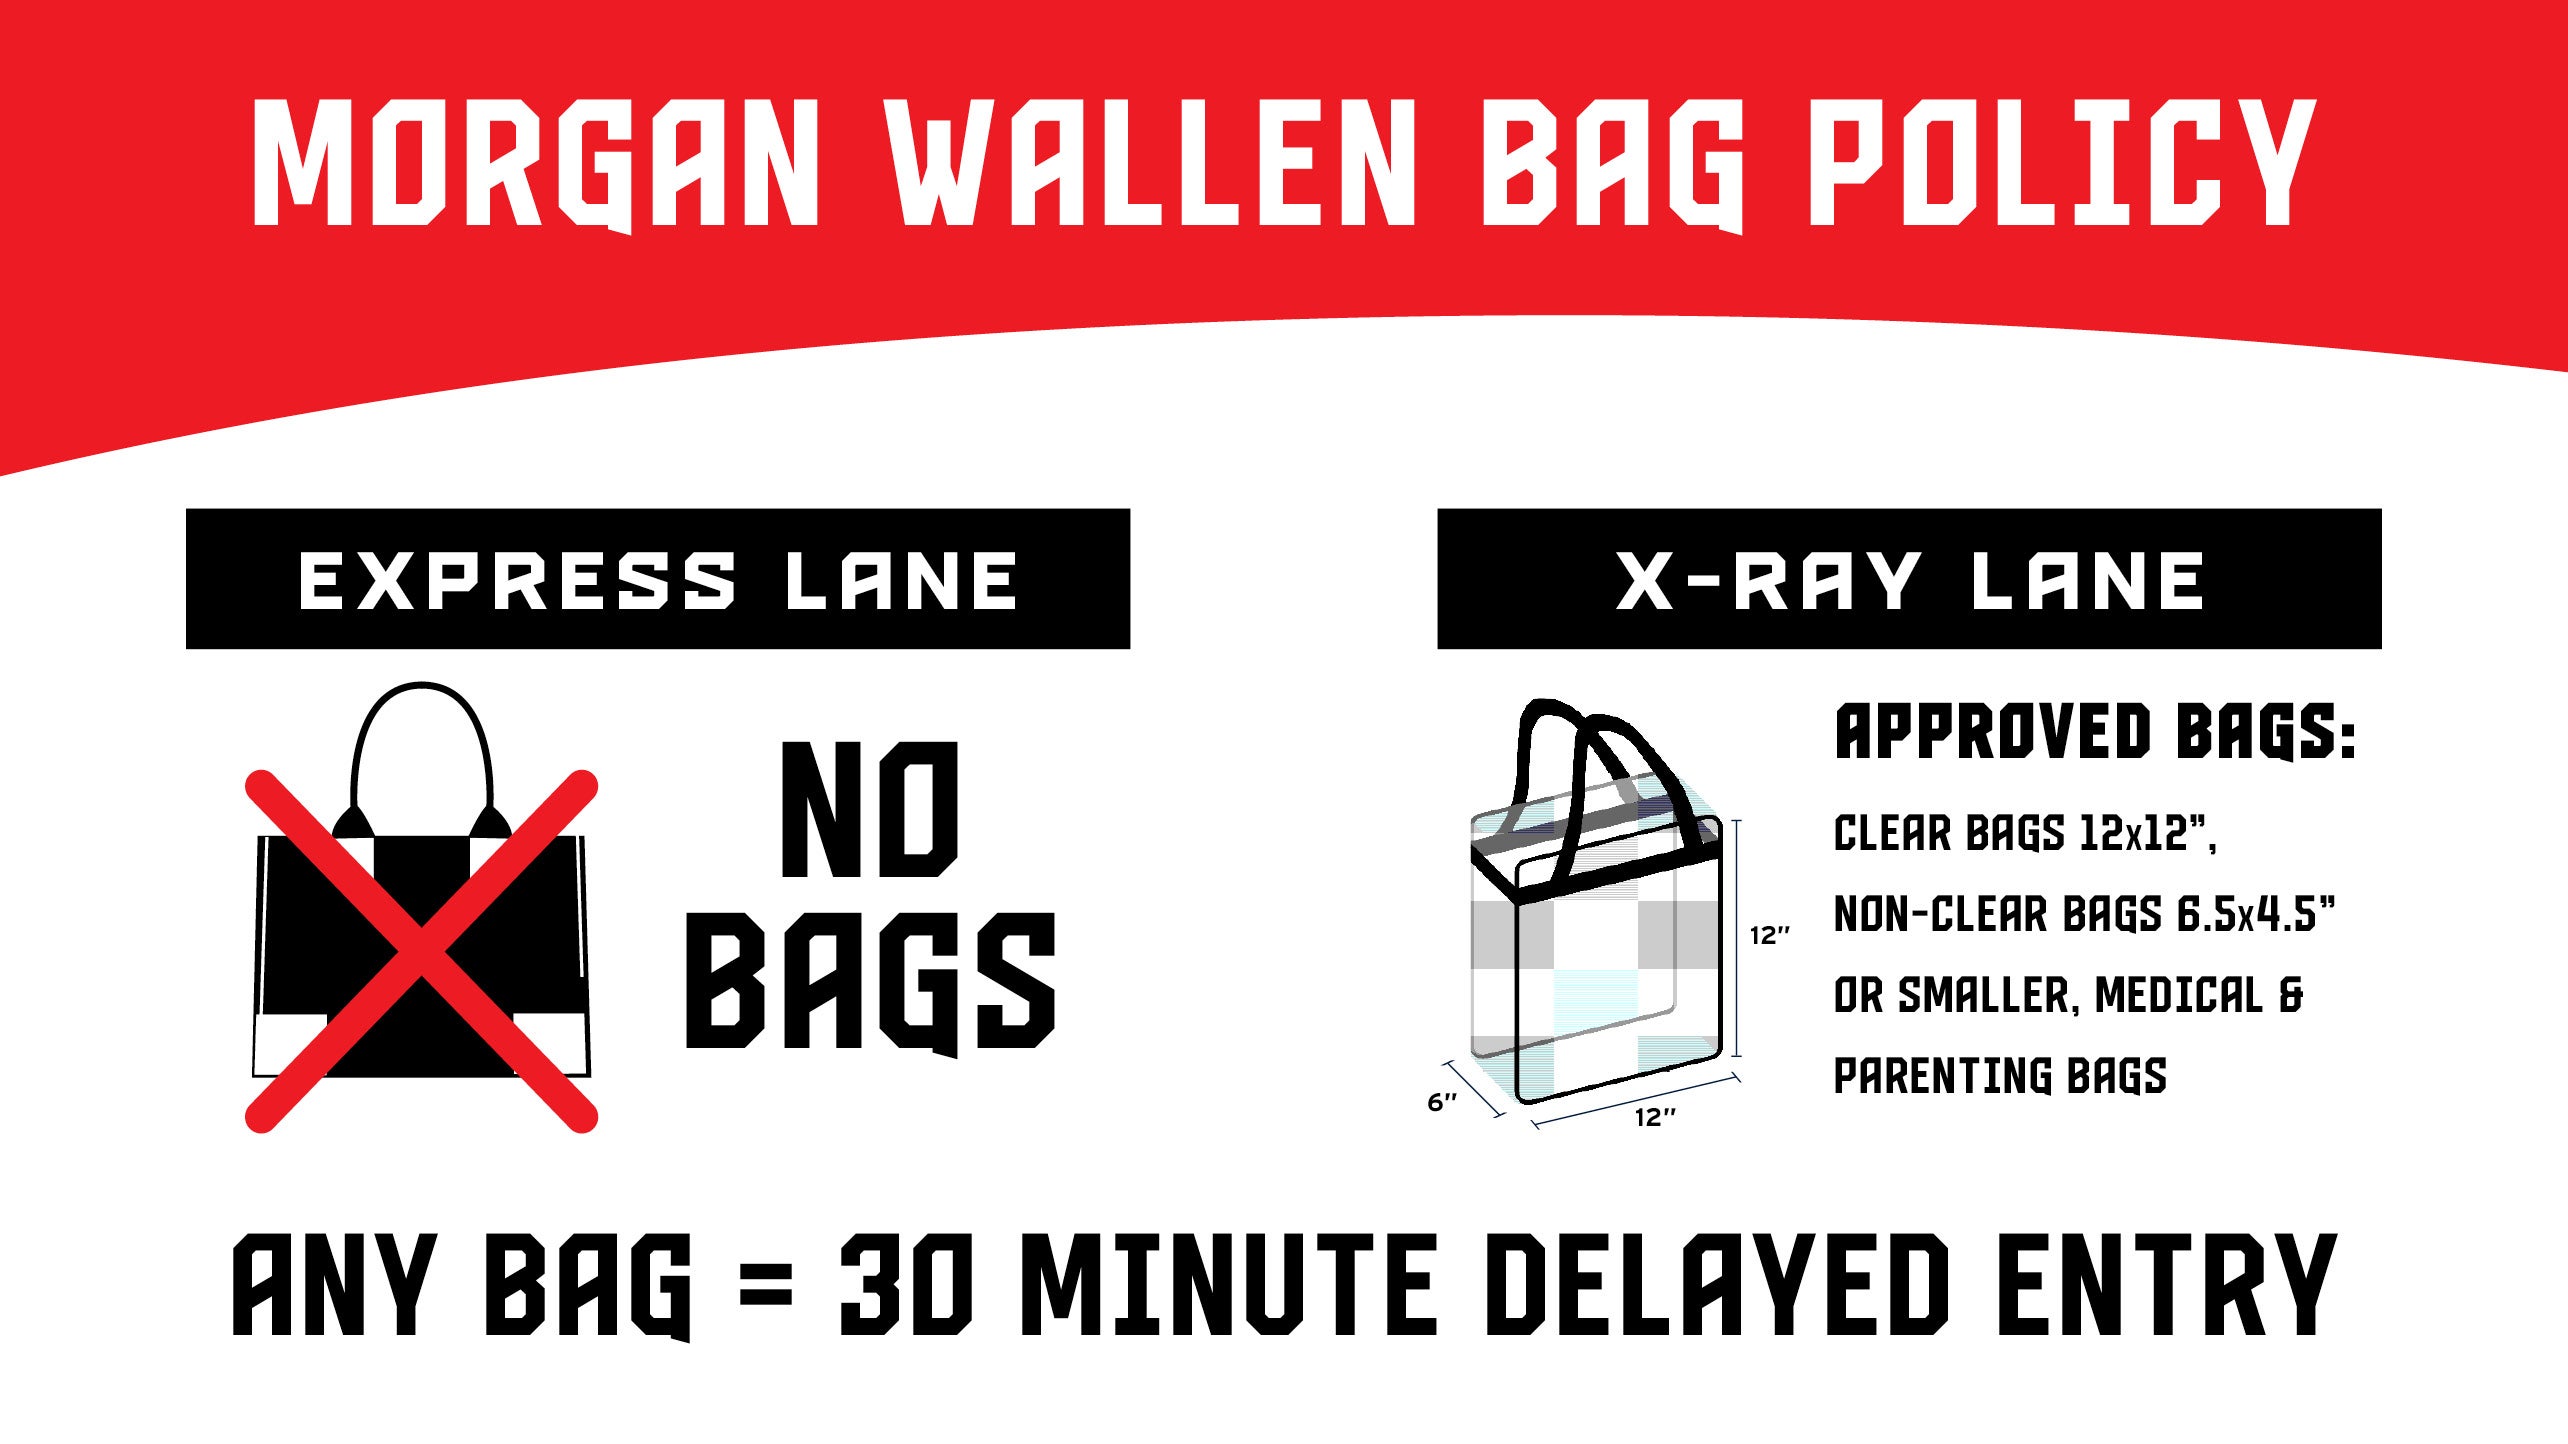 bag policy, clear bags 